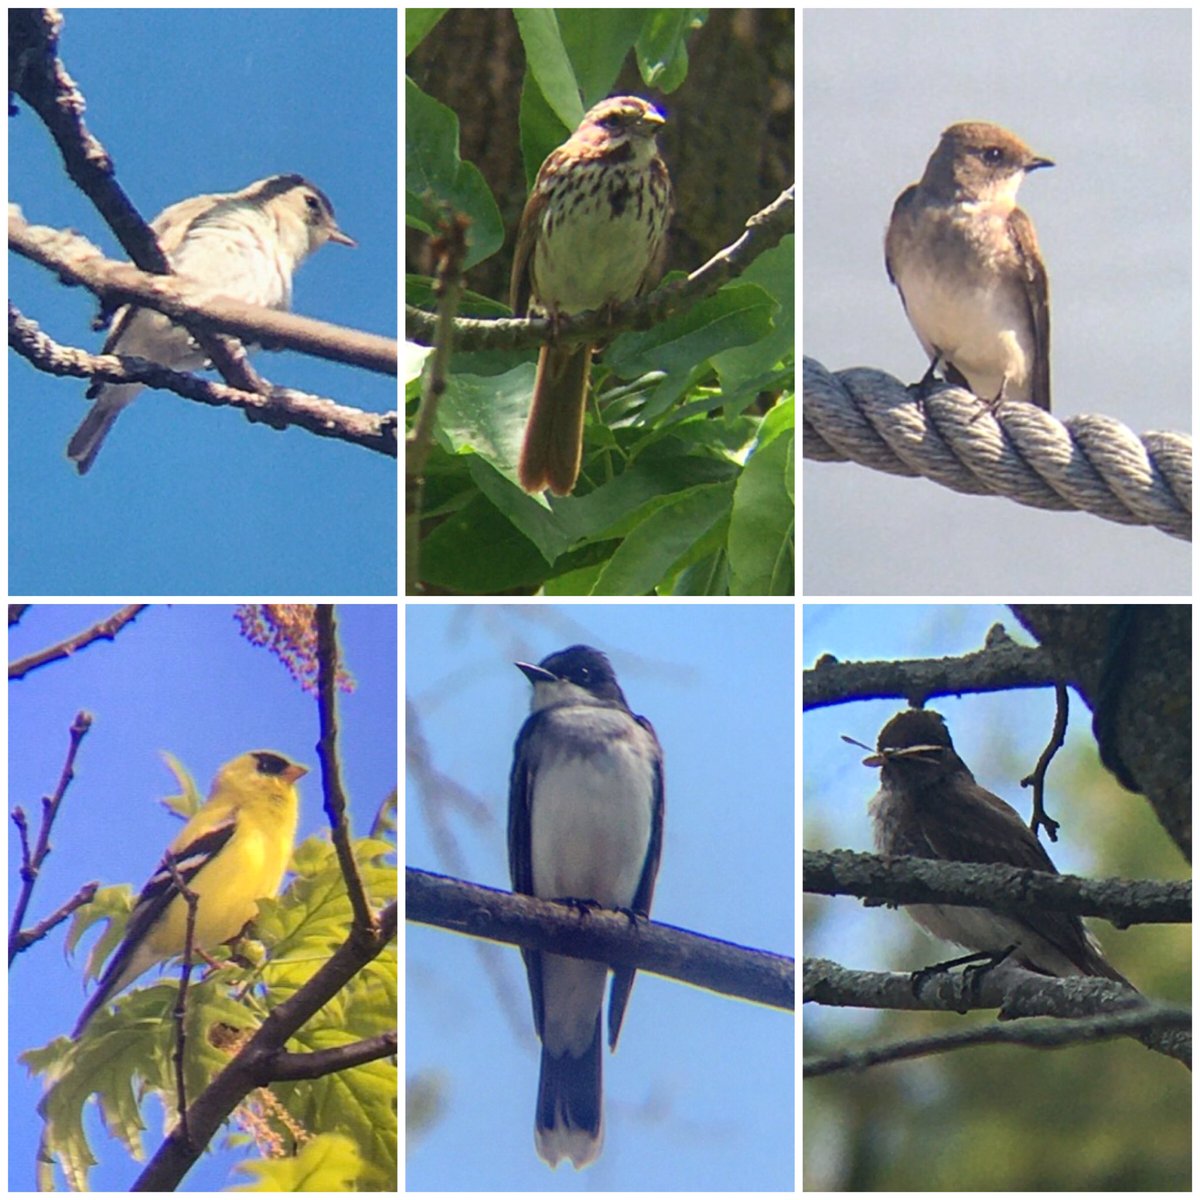 Ontario Place bird notes #33 | Warbling Vireos, Song Sparrows, Eastern Kingbird, Goldfinches, Northern Rough-winged Swallows, & nesting Eastern Phoebes. The Toronto  #FeministBirdClub birdathon for the Black Legal Action Centre continues: you can donate at  https://www.paypal.com/pools/c/8pQOSstvwg